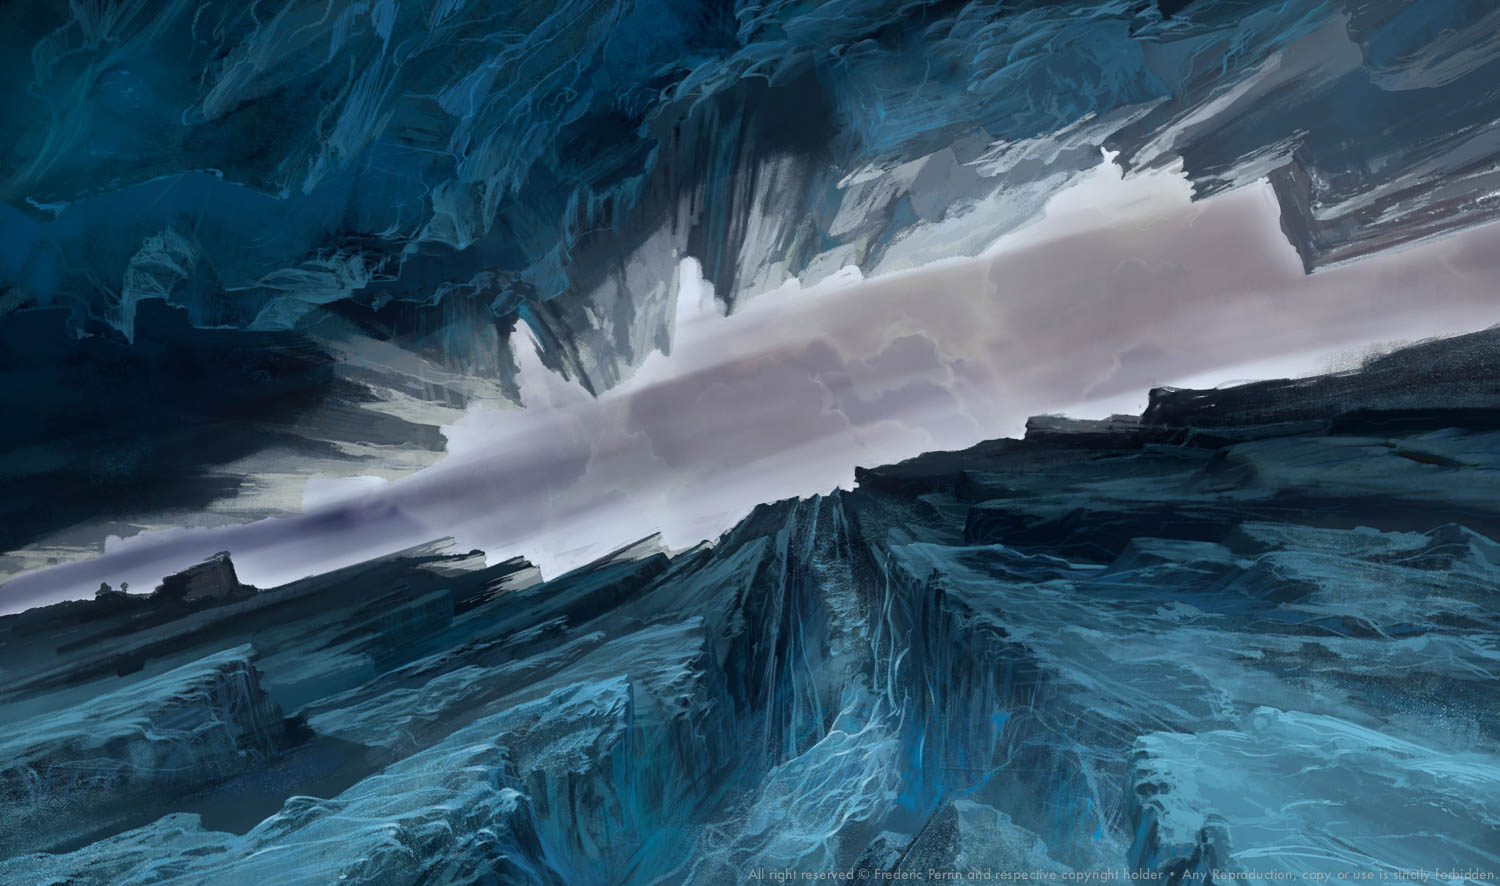 concept art, digital paintings for the environments of the Animated TV show